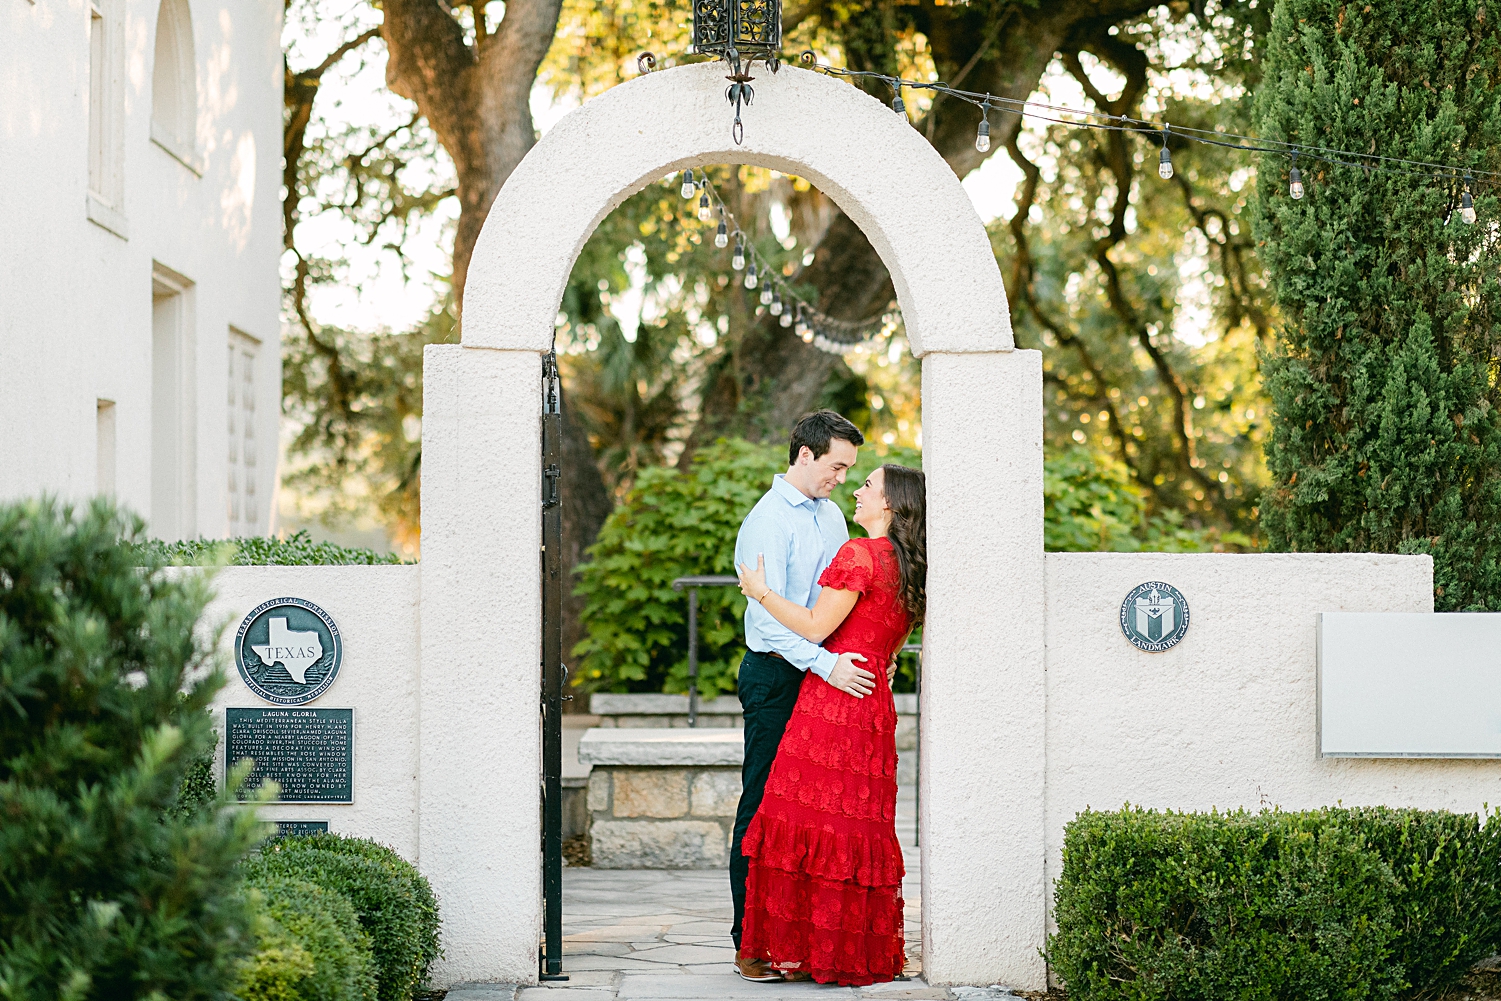 Man and woman in red dress embracing under archway Austin Laguna Gloria